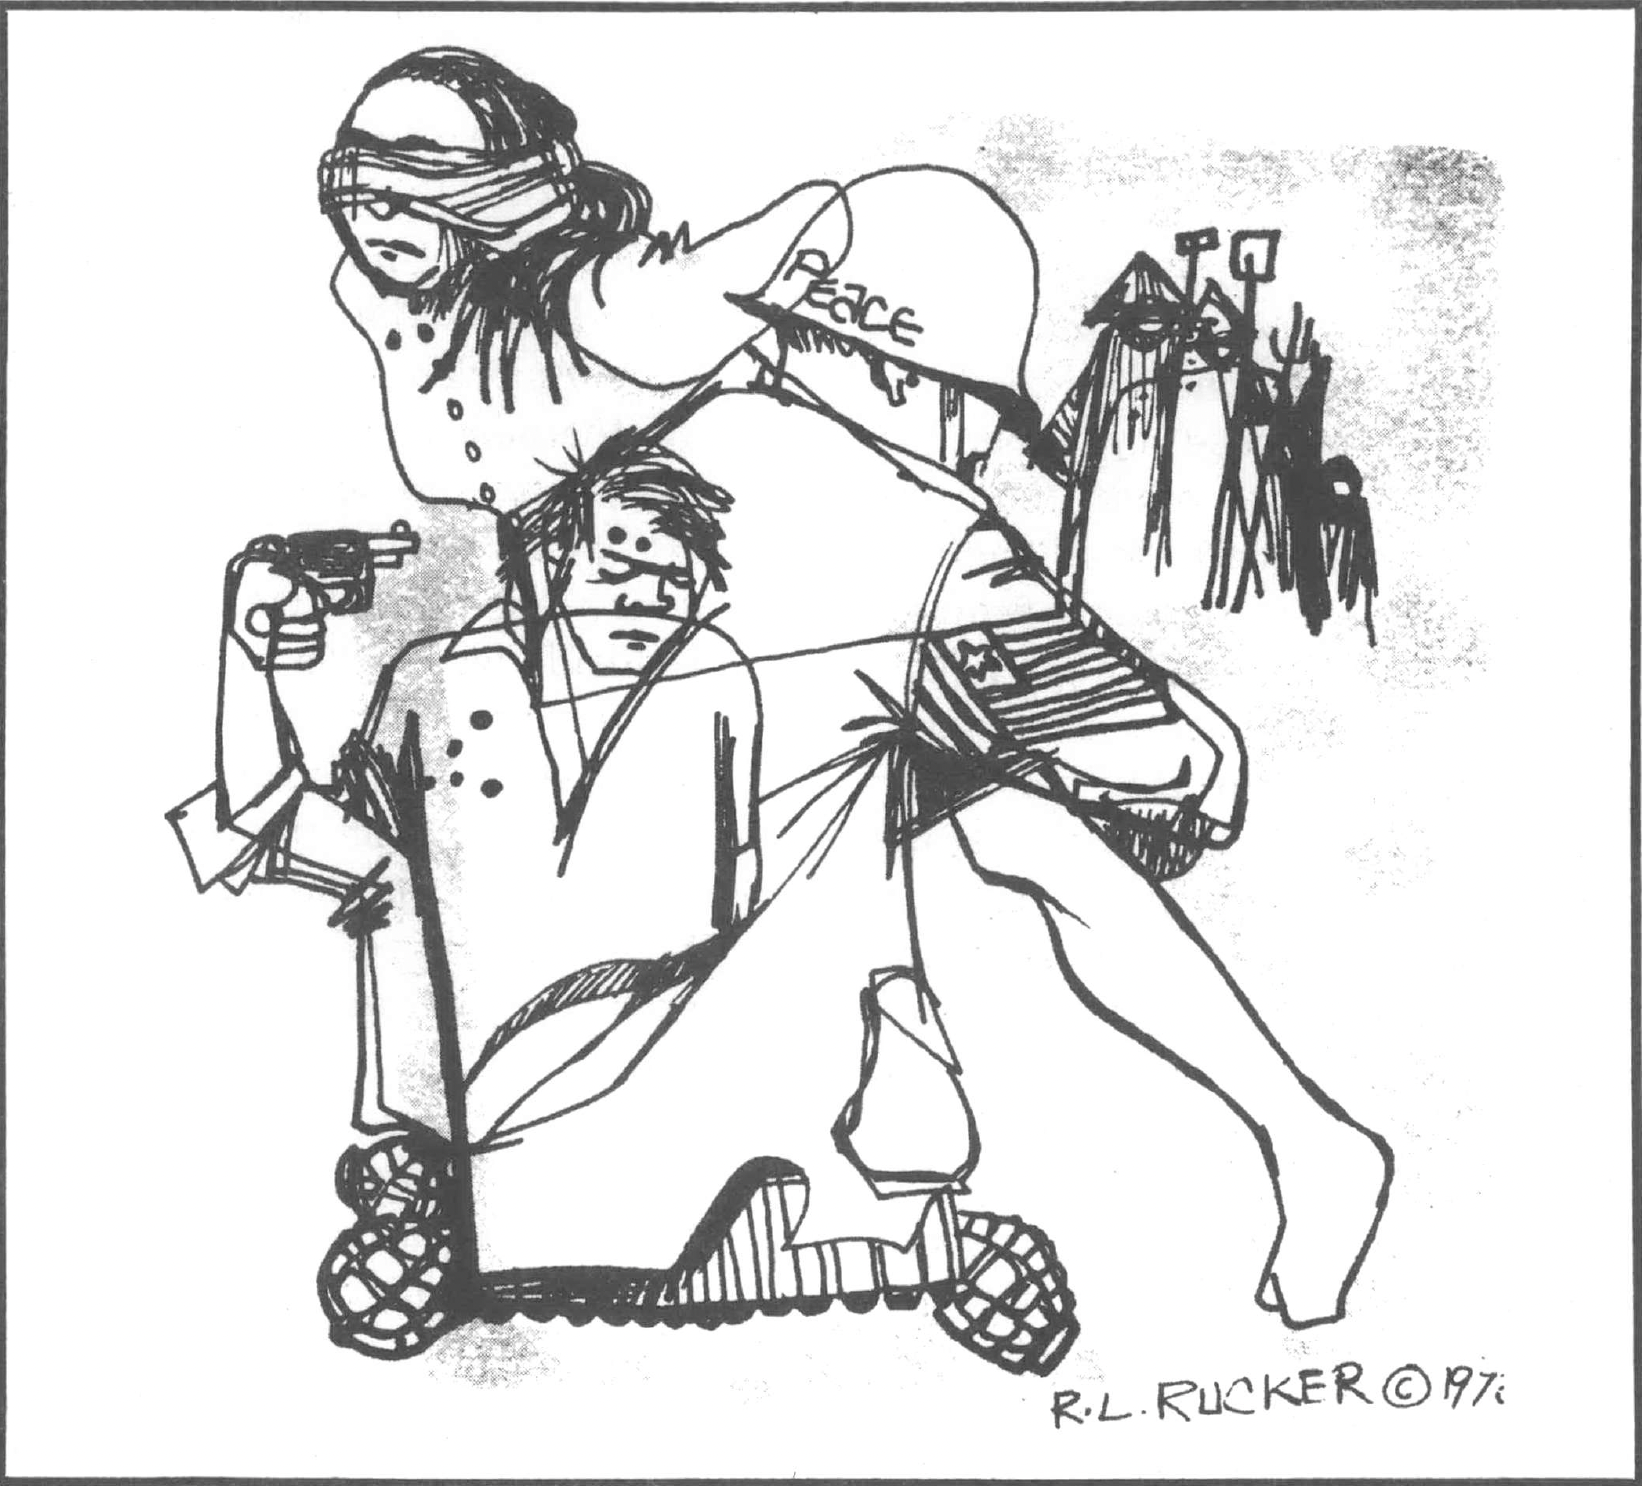 An ink drawing of a blindfolded woman, a man on the ground, and a soldier